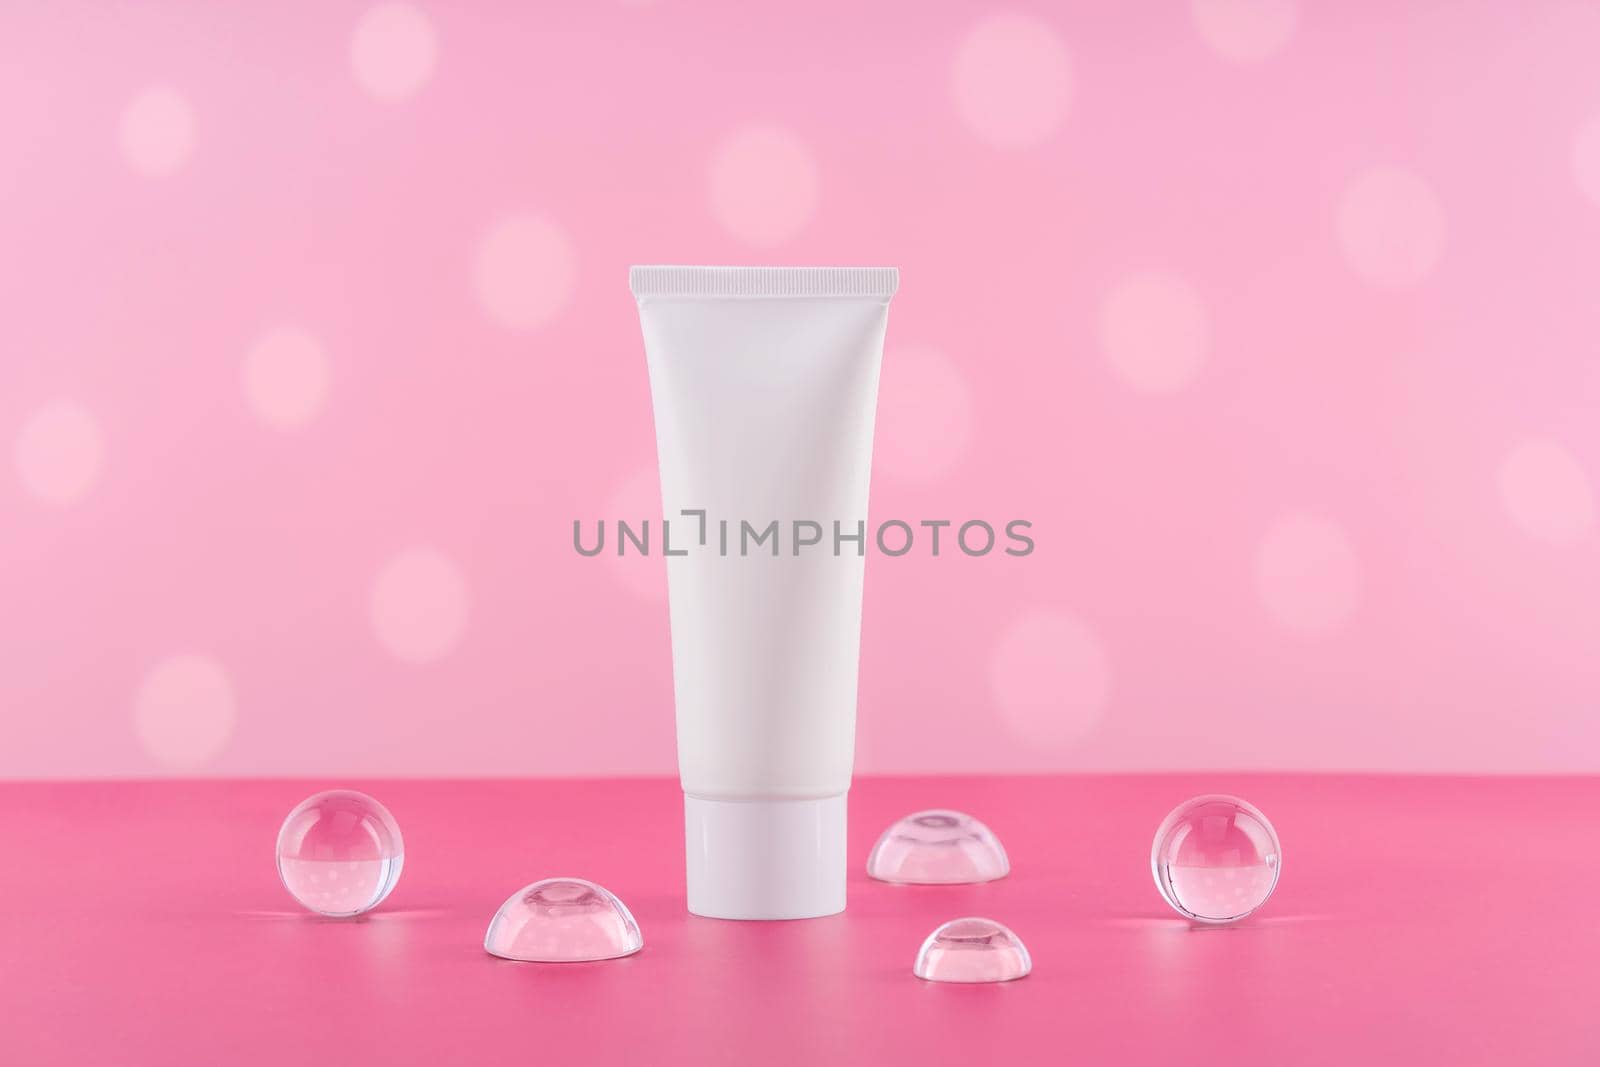 Unbranded cosmetic cream white plastic tube mockup on pink background. Blank body and health care beauty product packaging. Moisturising hand creme bottle with stylish props. Product presentation